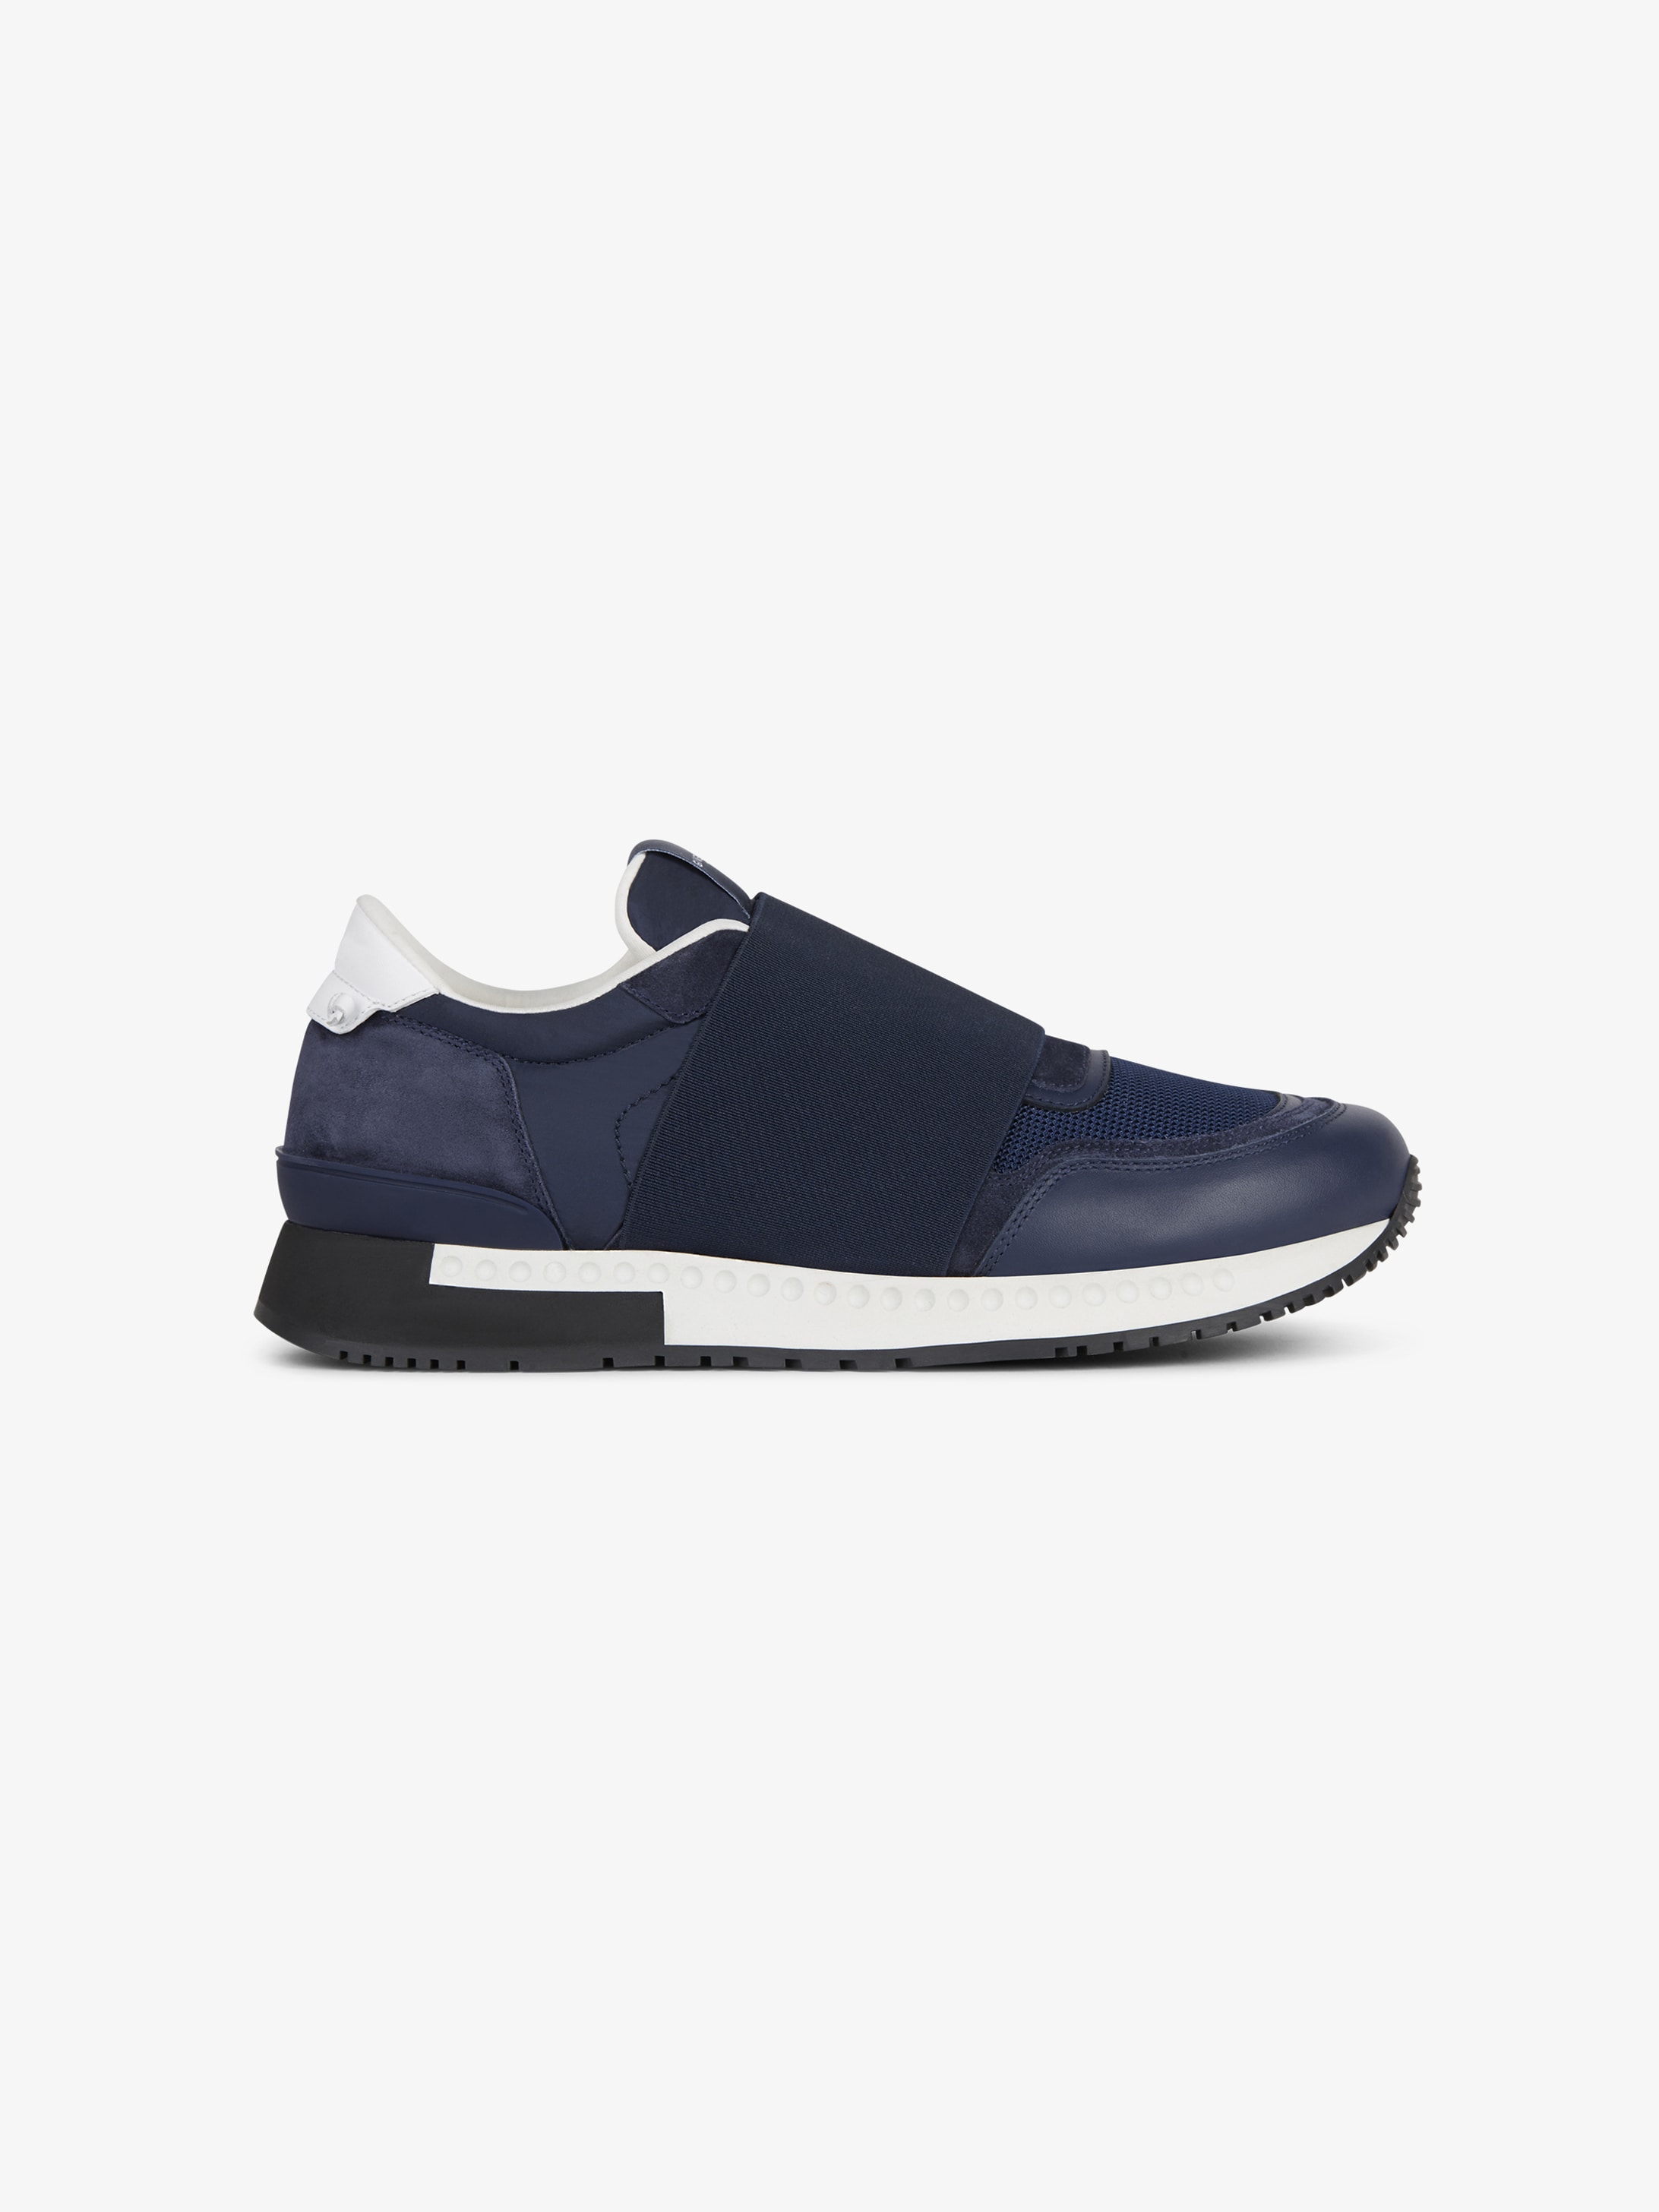 Givenchy Elastic runner sneakers in 